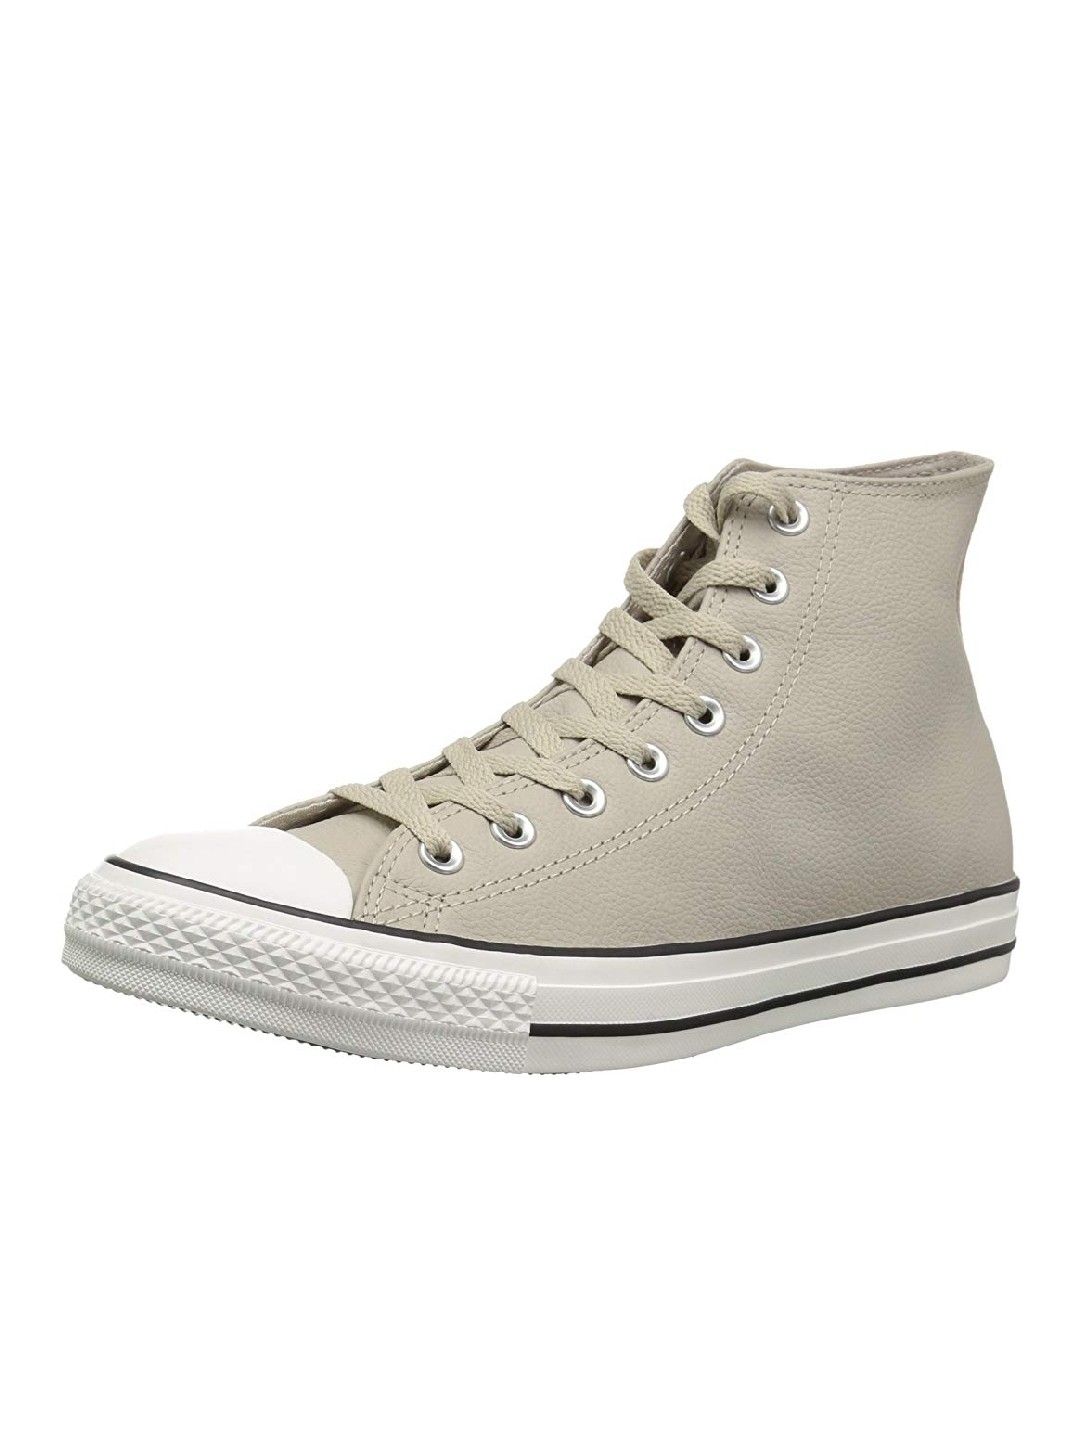 Men's Converse Chuck Taylor All Star Leather High Top Shoes